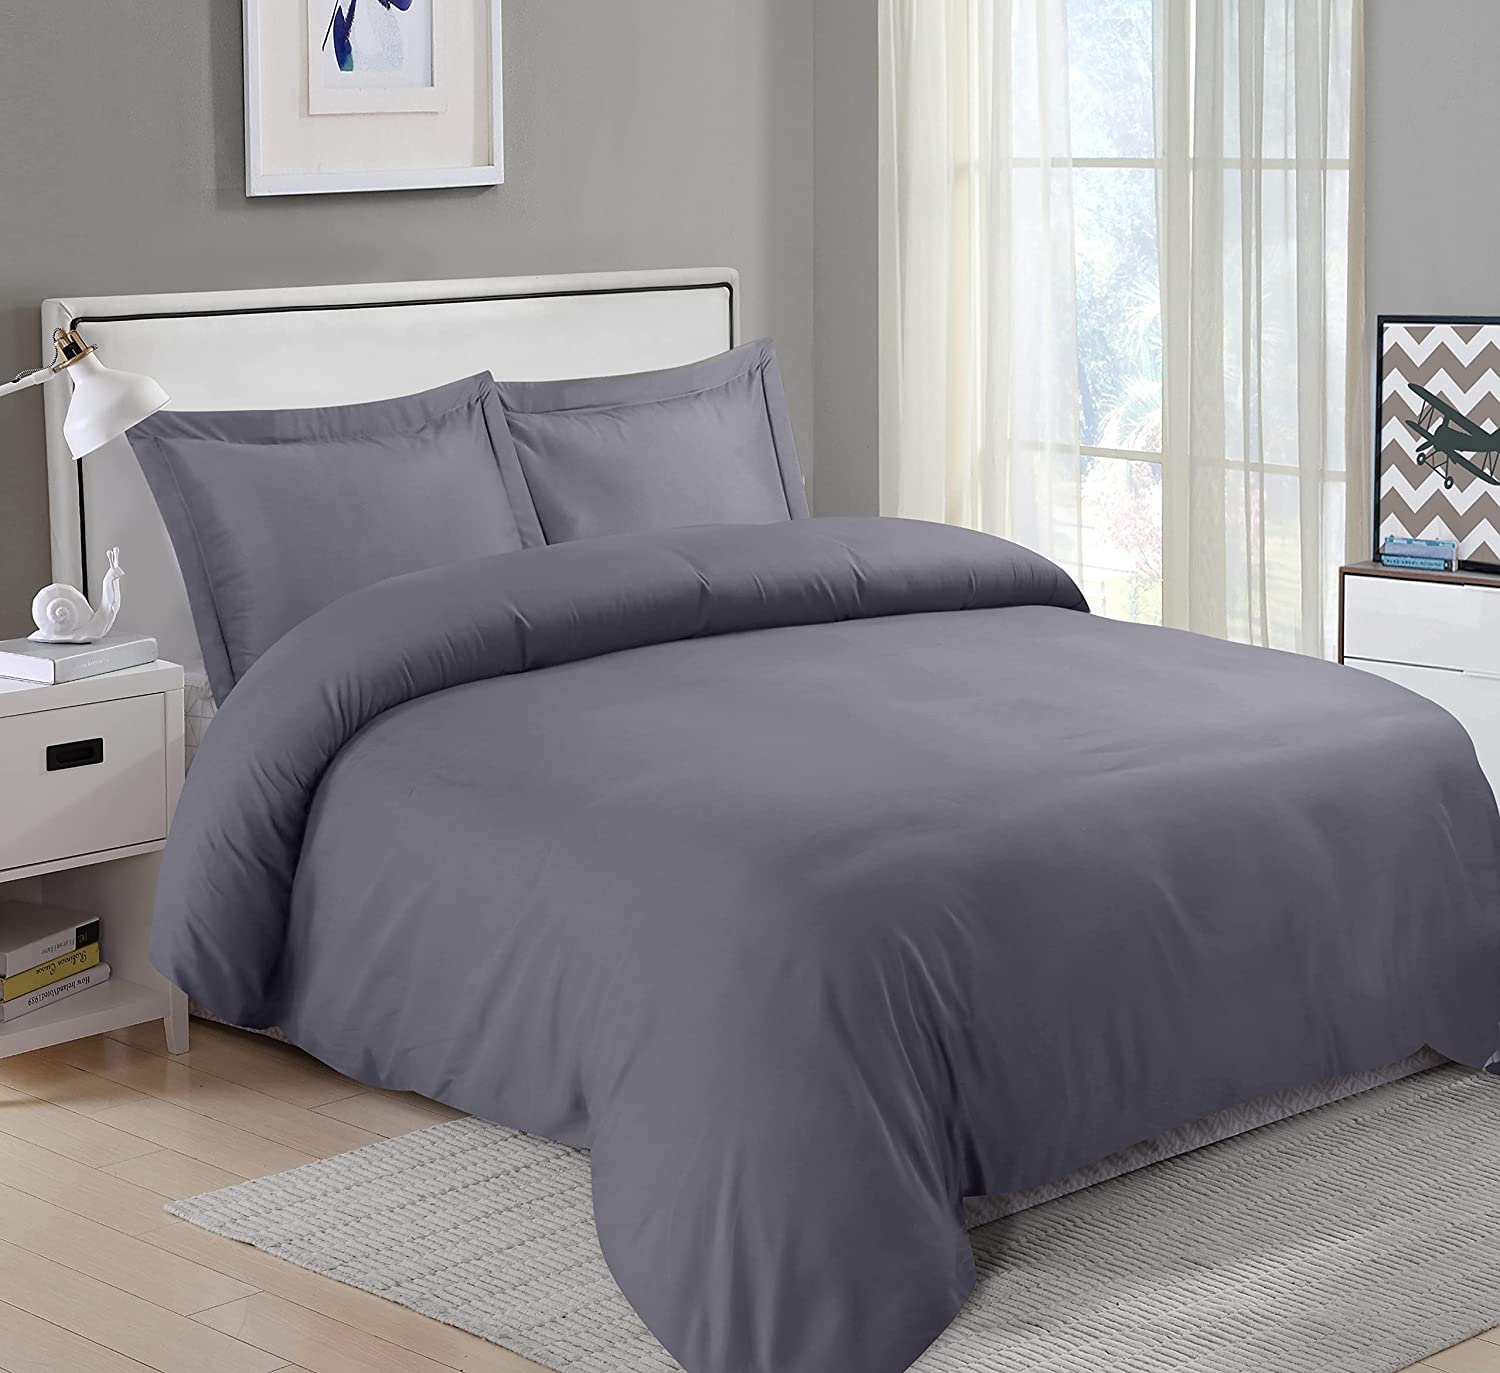 Duvet Cover King Size Set - 1 Duvet Cover with 2 Pillow Shams - 3 Pieces Comforter Cover with Zipper Closure - Ultra Soft Brushed - Grey